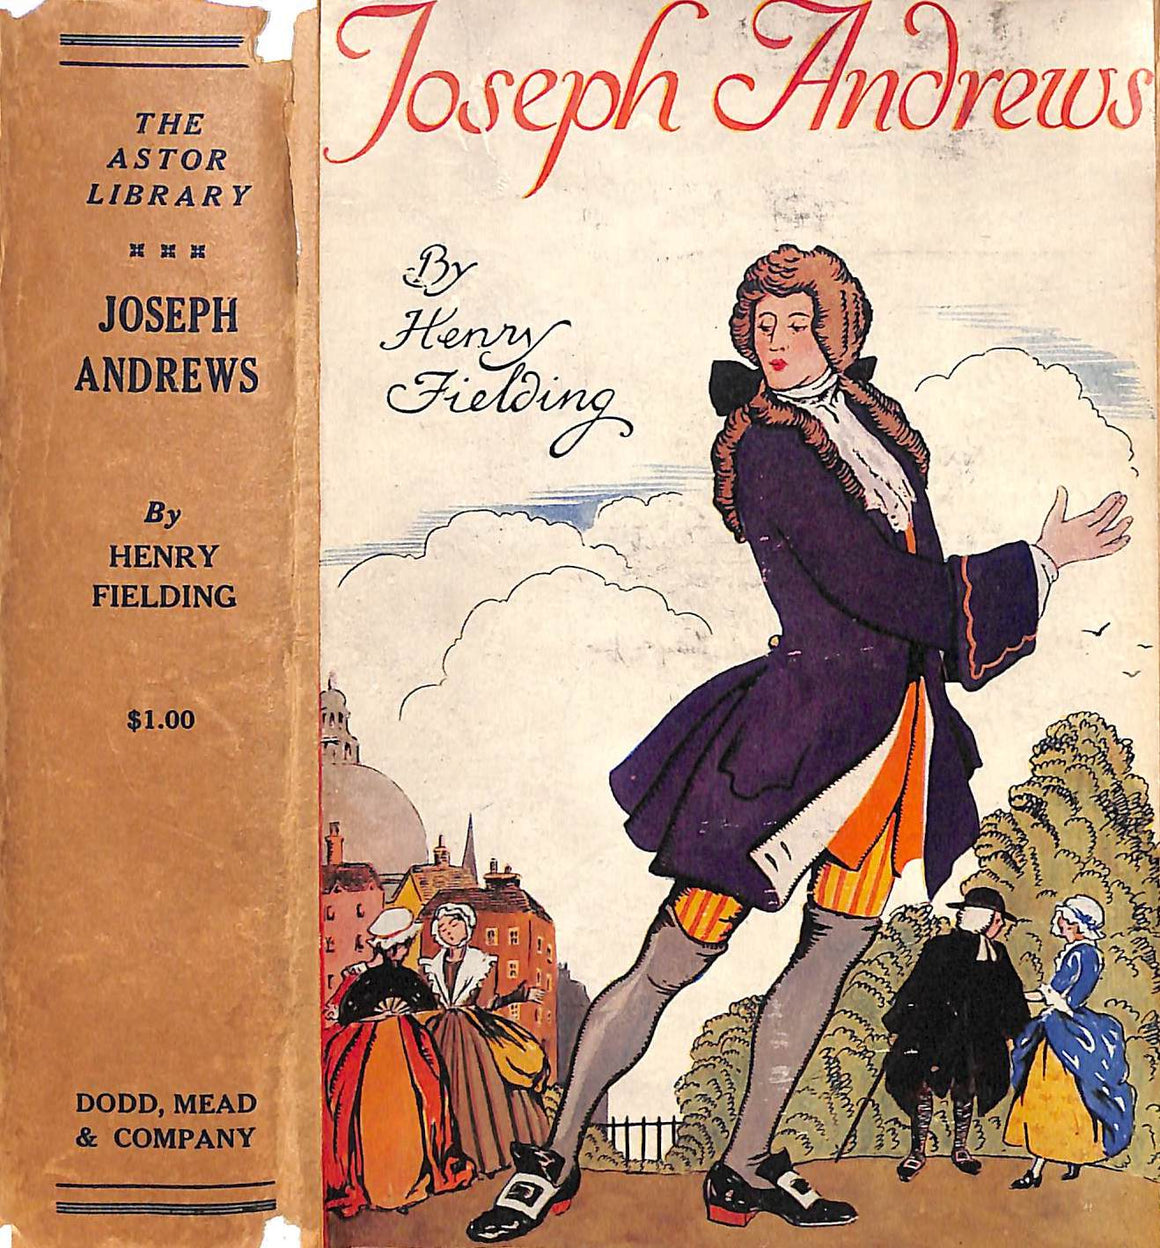 "The History Of The Adventures Of Joseph Andrews" 1929 FIELDING, Henry